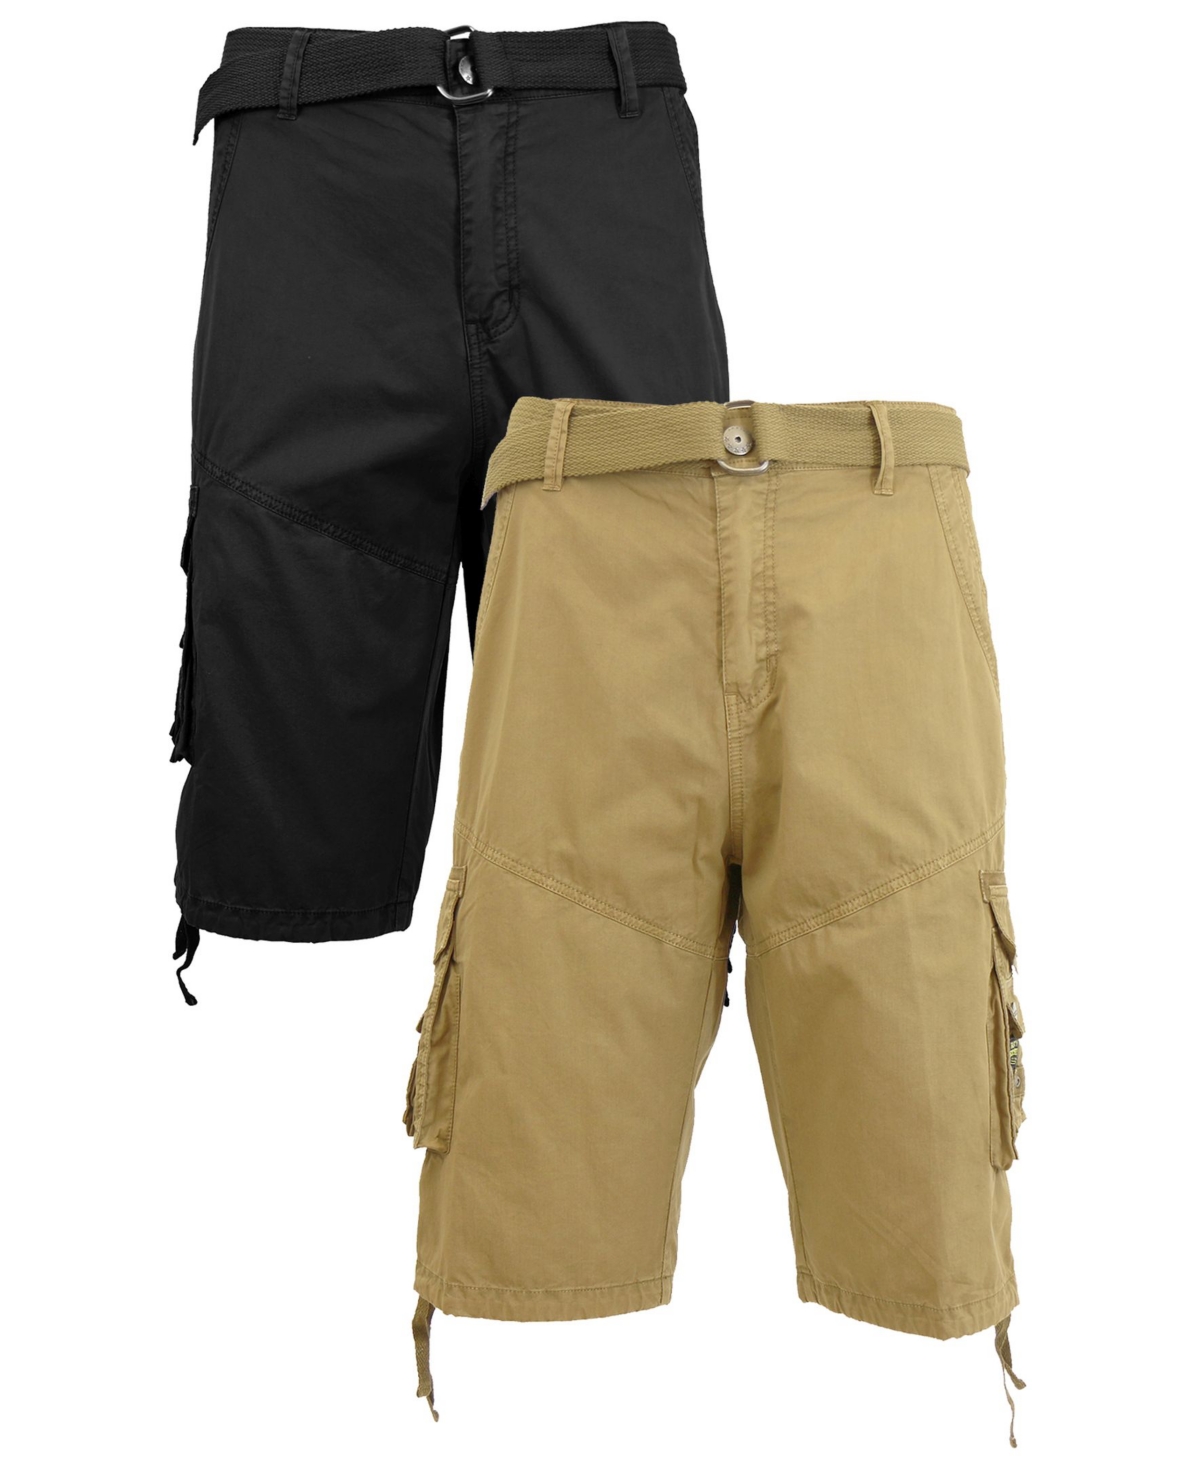 Men's Belted Cargo Shorts with Twill Flat Front Washed Utility Pockets, Pack of 2 - Khaki and Timber